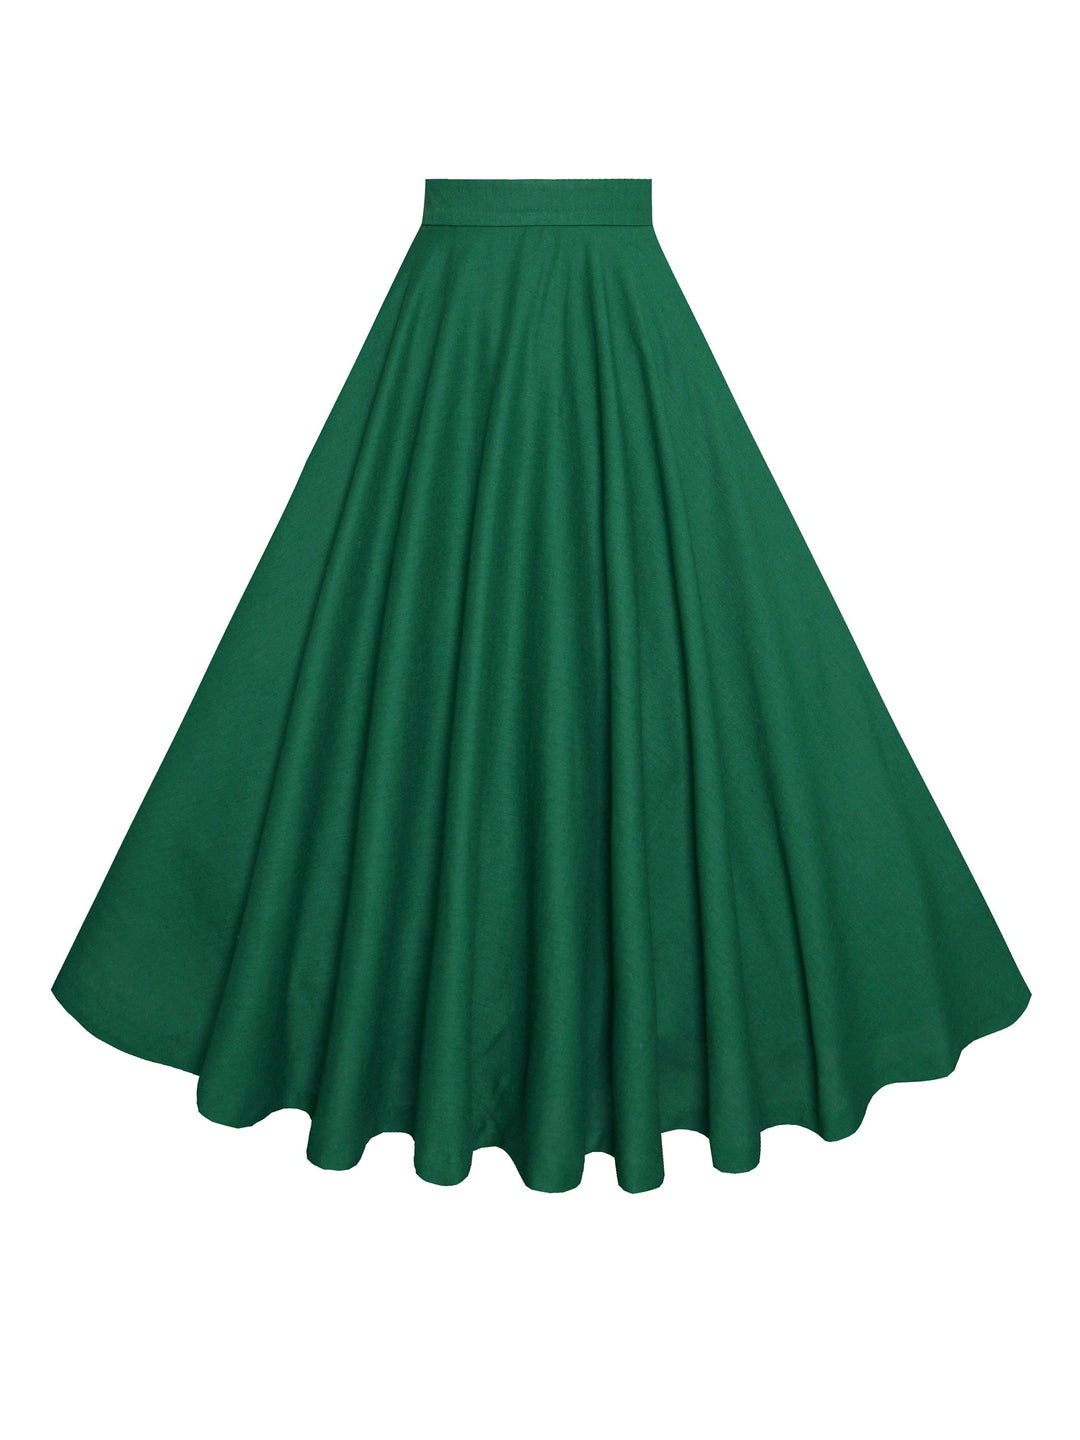 MTO - Lindy Skirt in Forest Green Linen